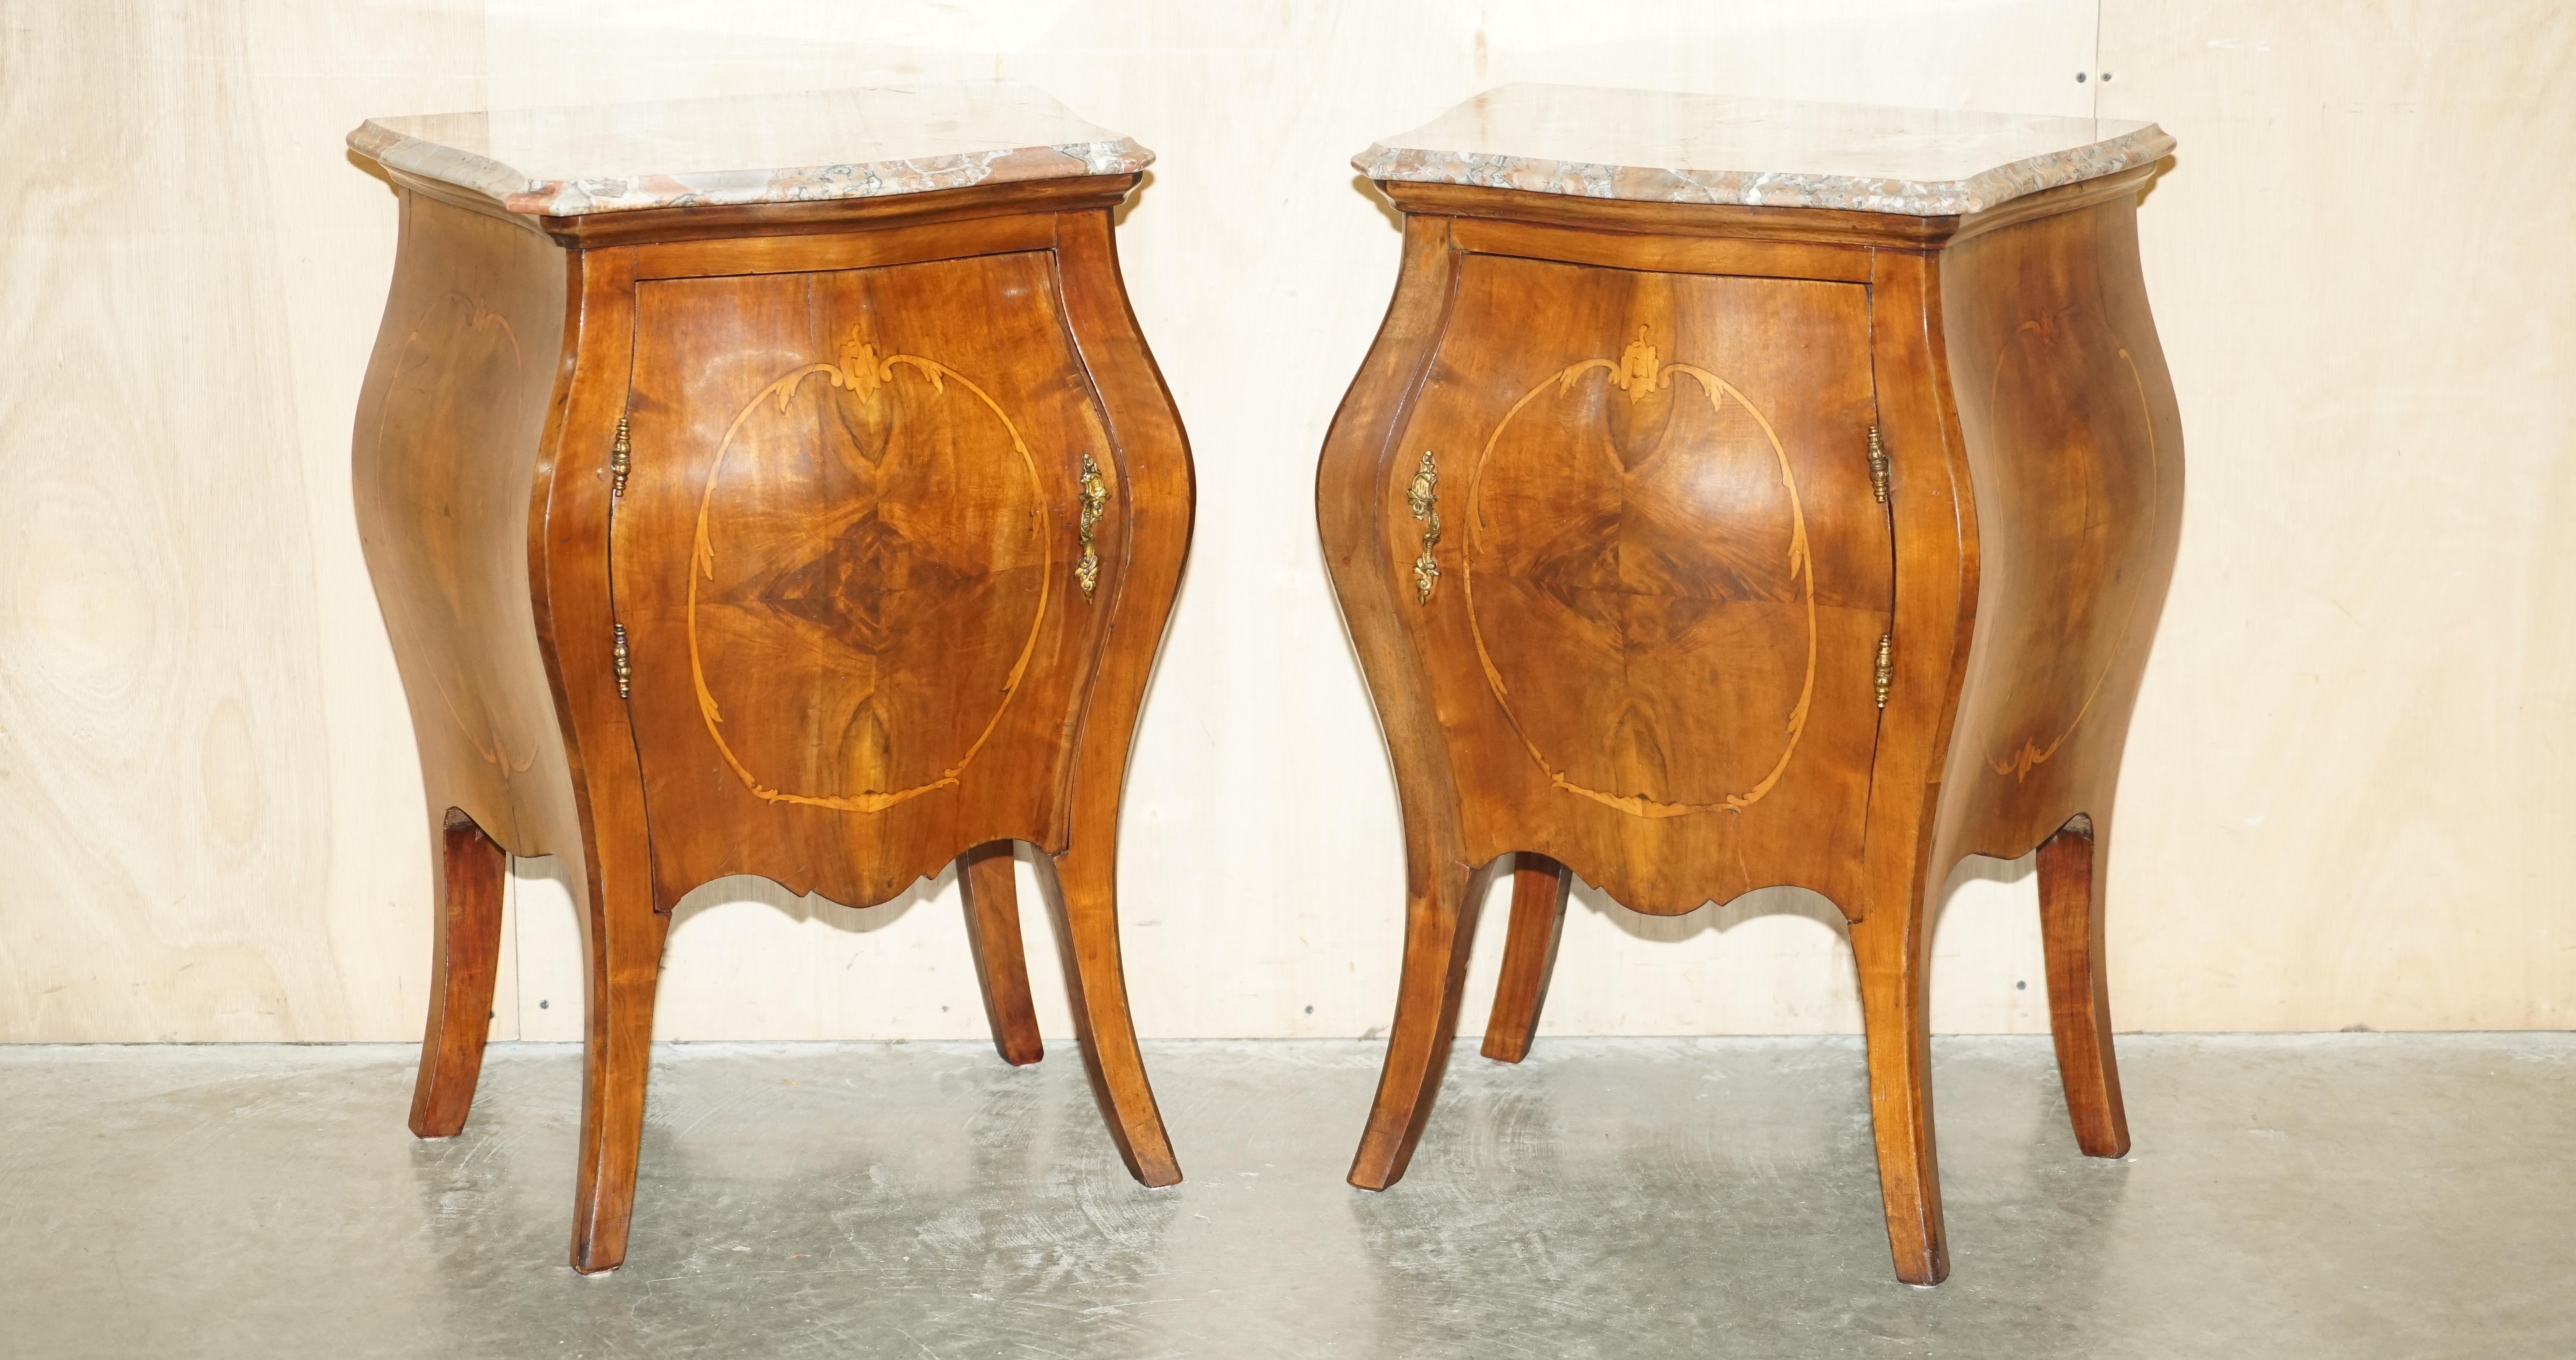 Royal House Antiques

Royal House Antiques is delighted to offer for sale this lovely pair of Antique circa 1880 Italian Serpentine fronted Bombe side table chests with Marble tops 

Please note the delivery fee listed is just a guide, it covers